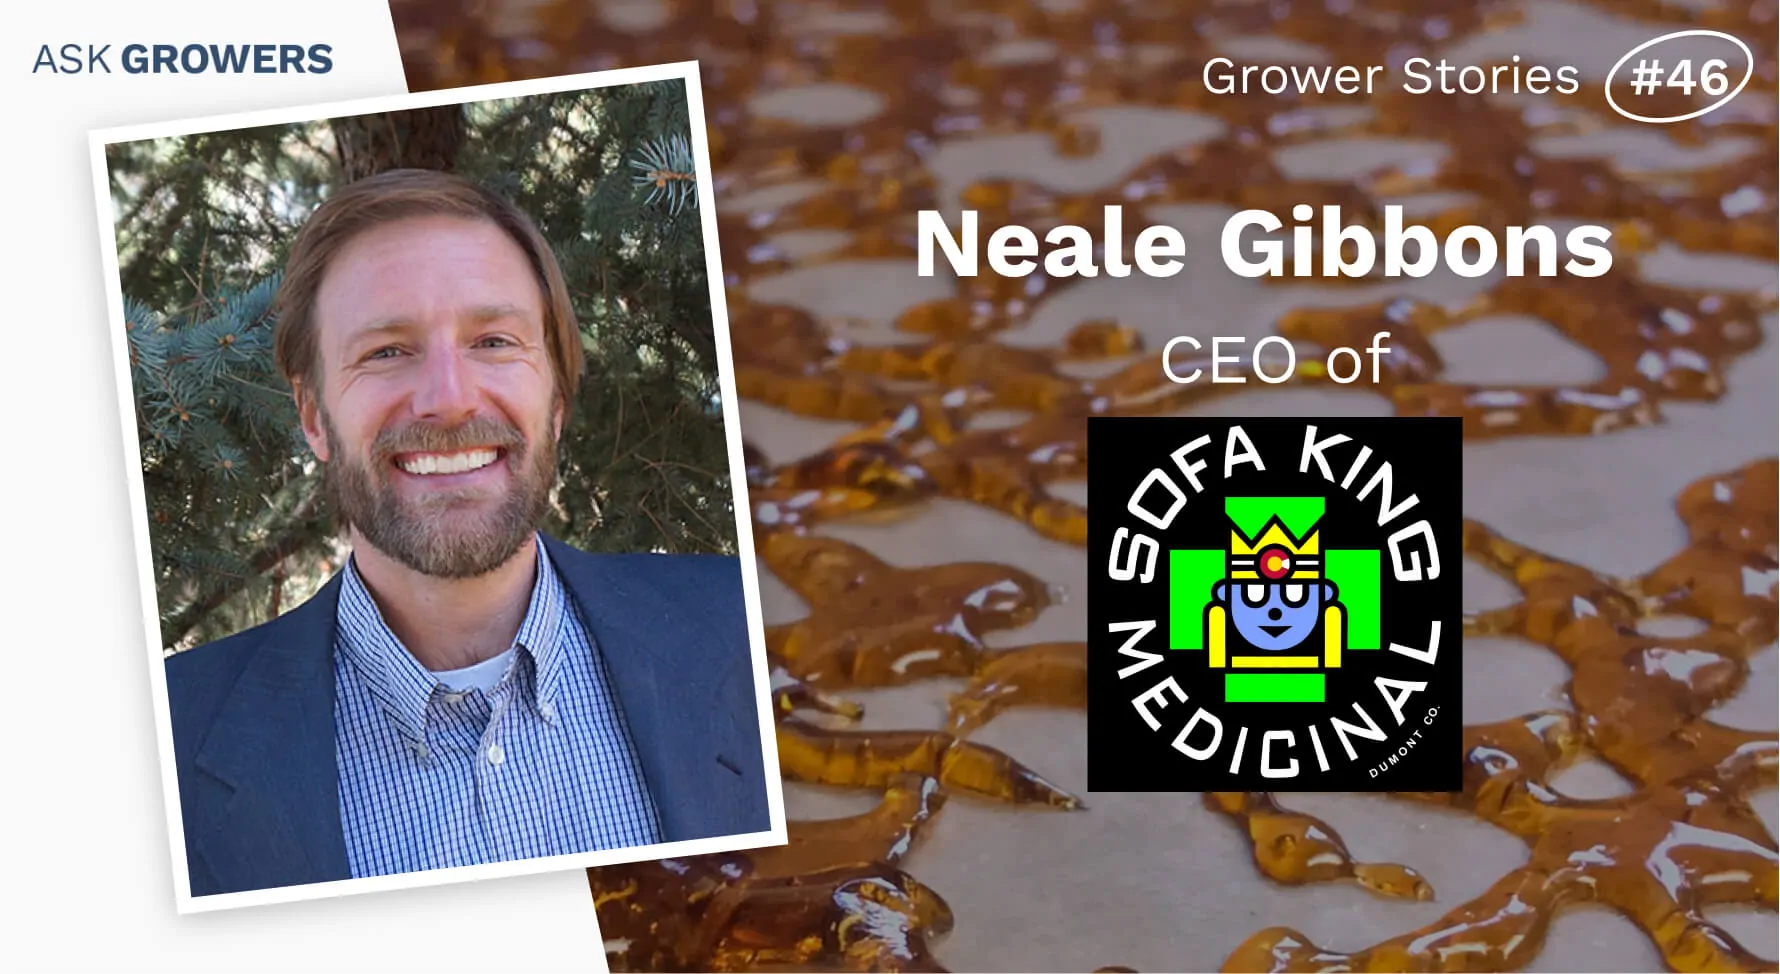 Grower Stories #46: Neale D. Gibbons